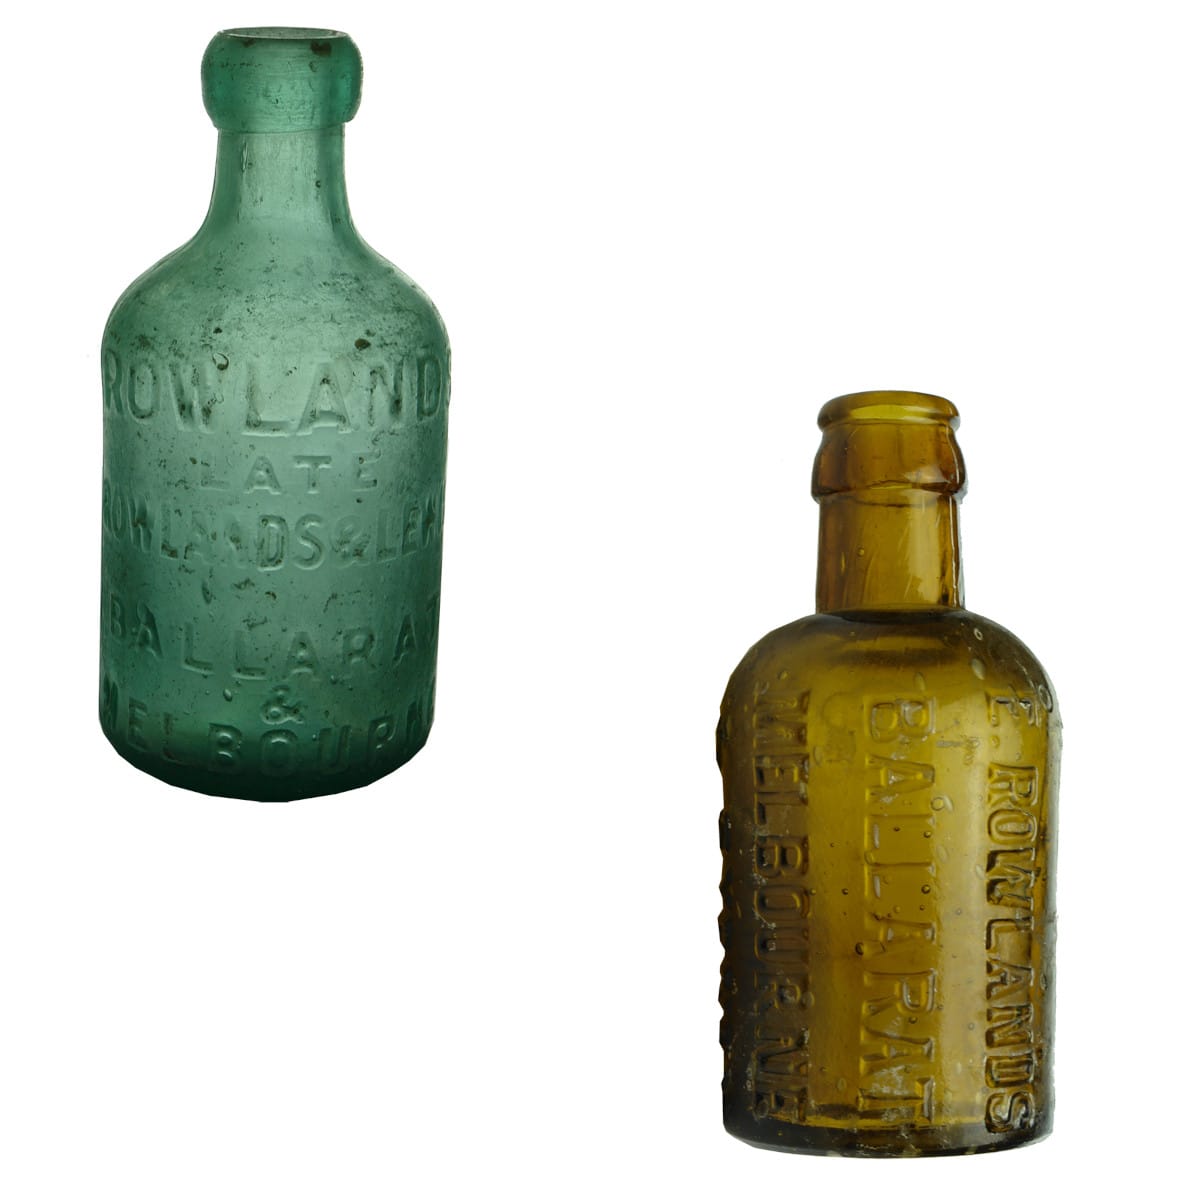 Two Rowlands Bottles. Rowlands, Ballarat & Melbourne. Blob Top. Rowlands, Ballarat, Melbourne & Sydney Crown Seal. (Victoria & New South Wales)